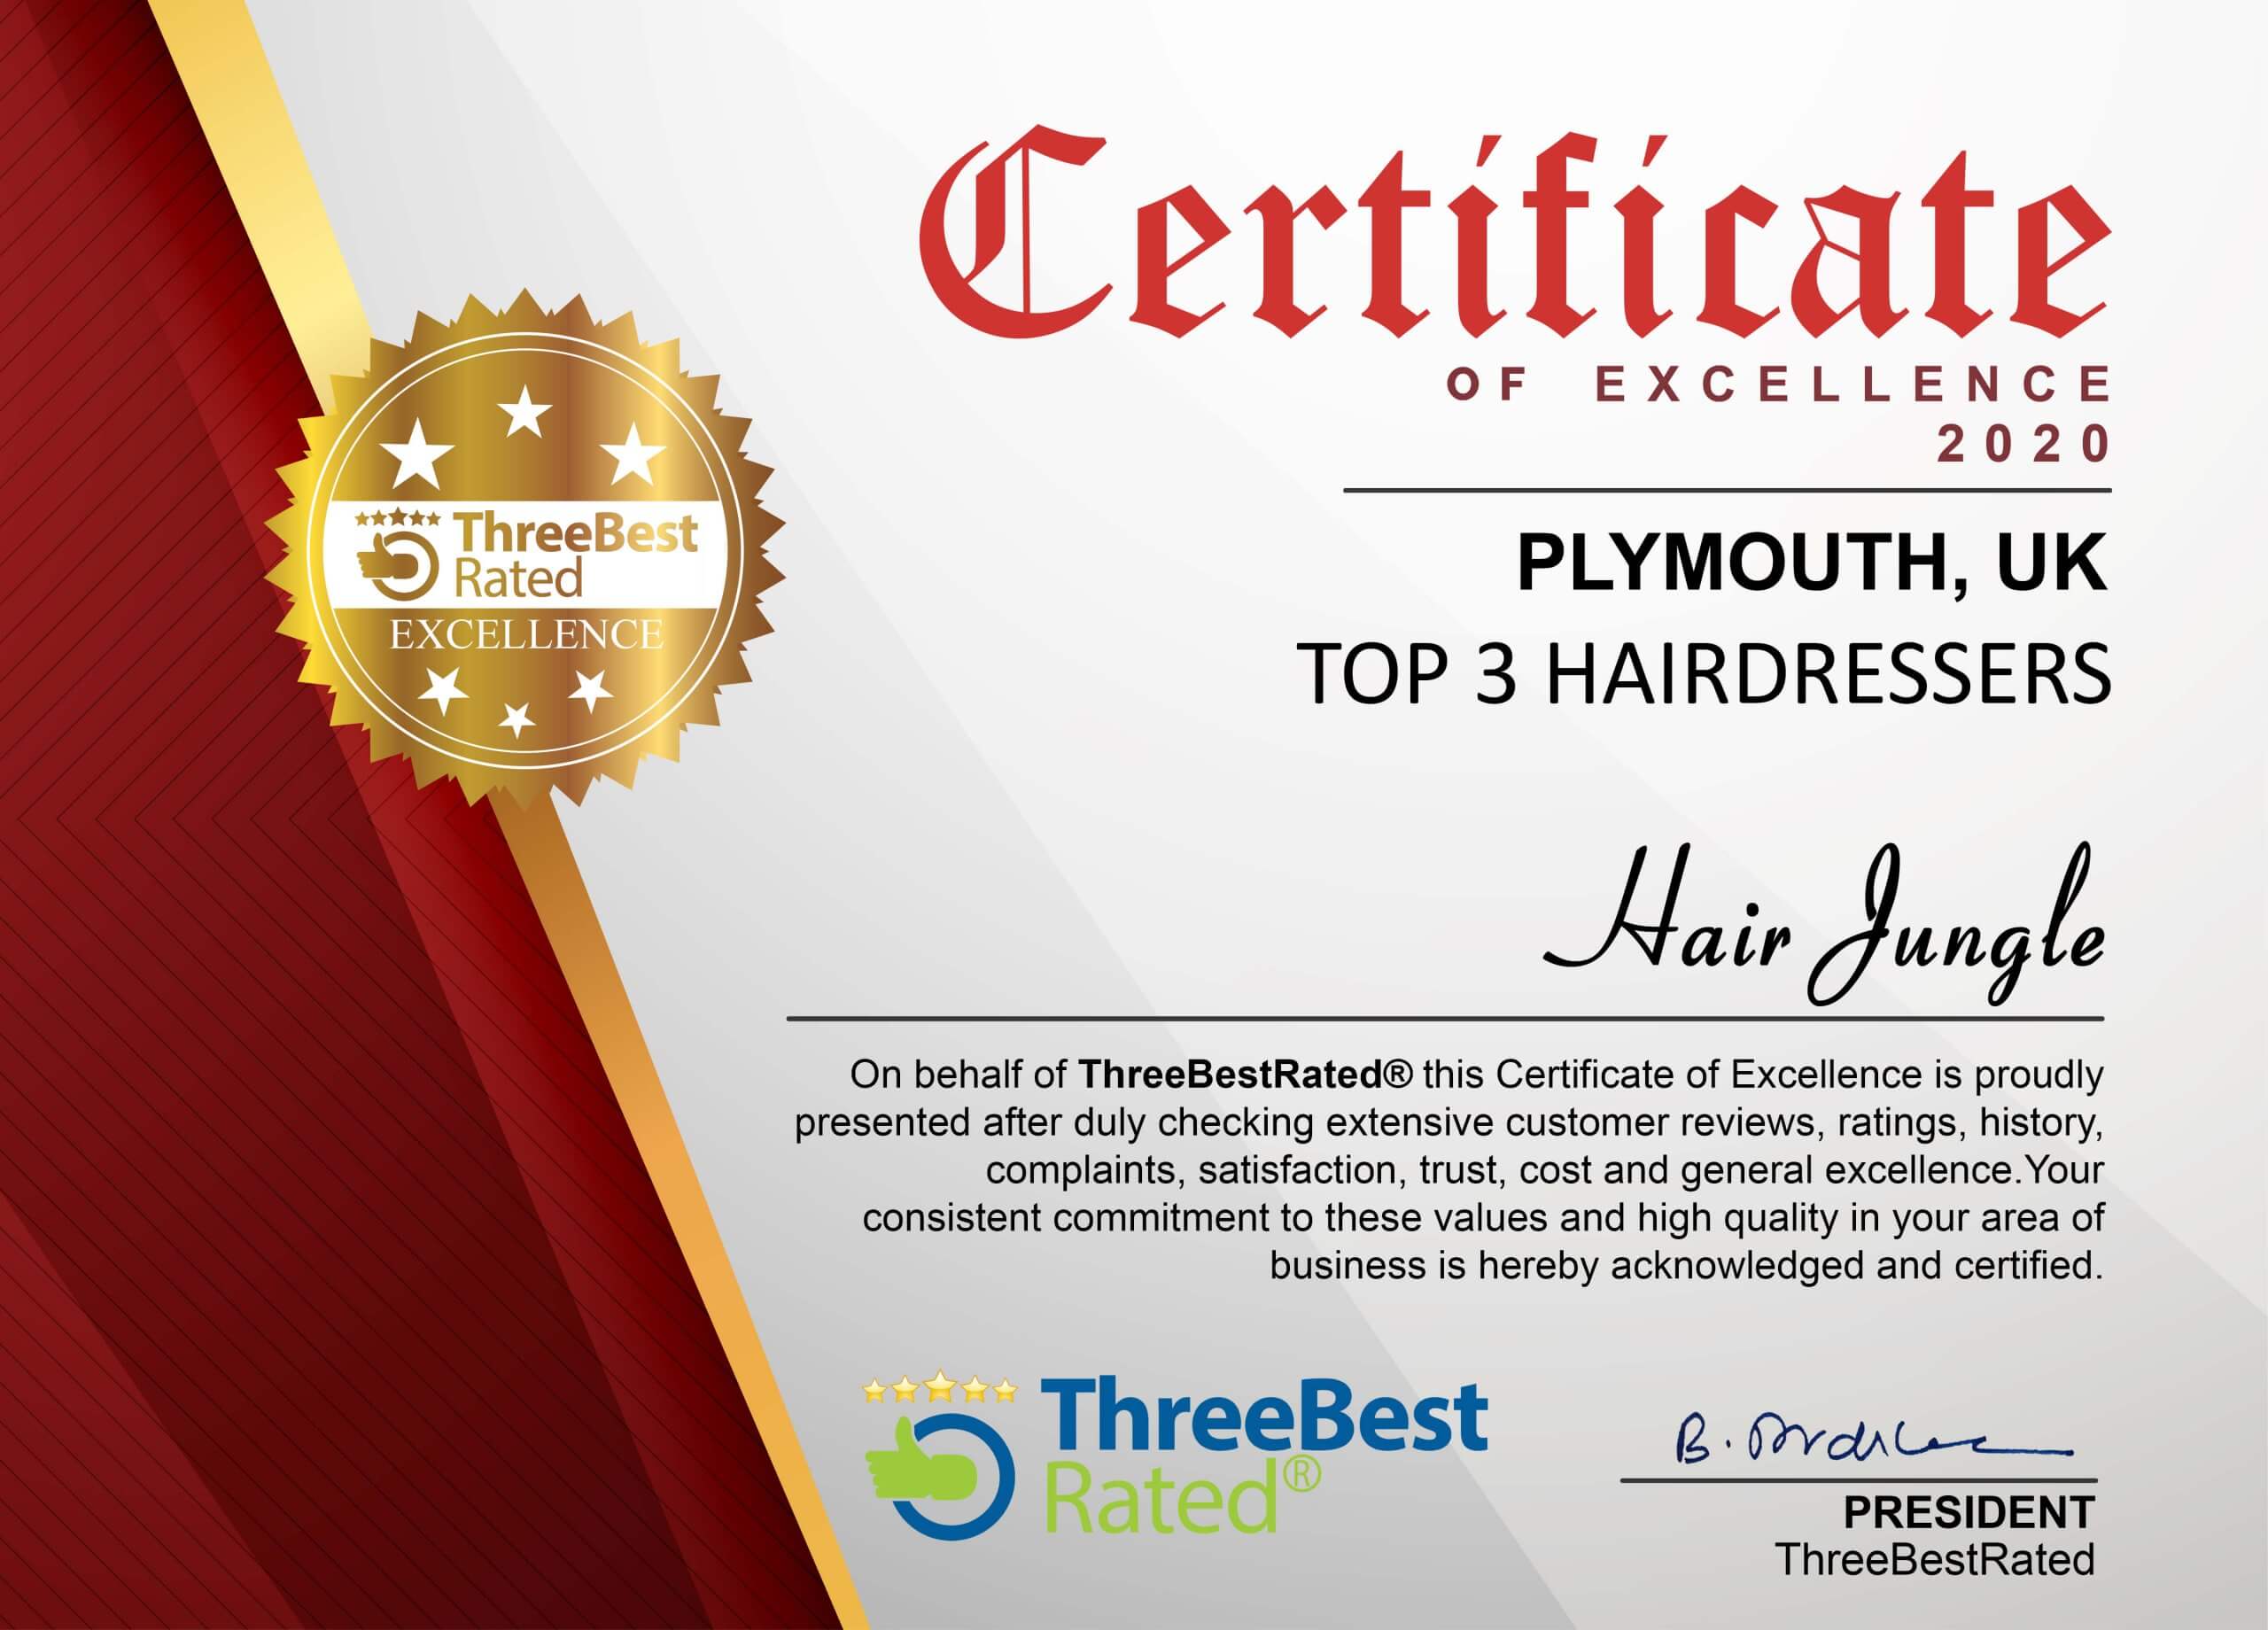 Three best rated certificate 2020 - Hair Jungle